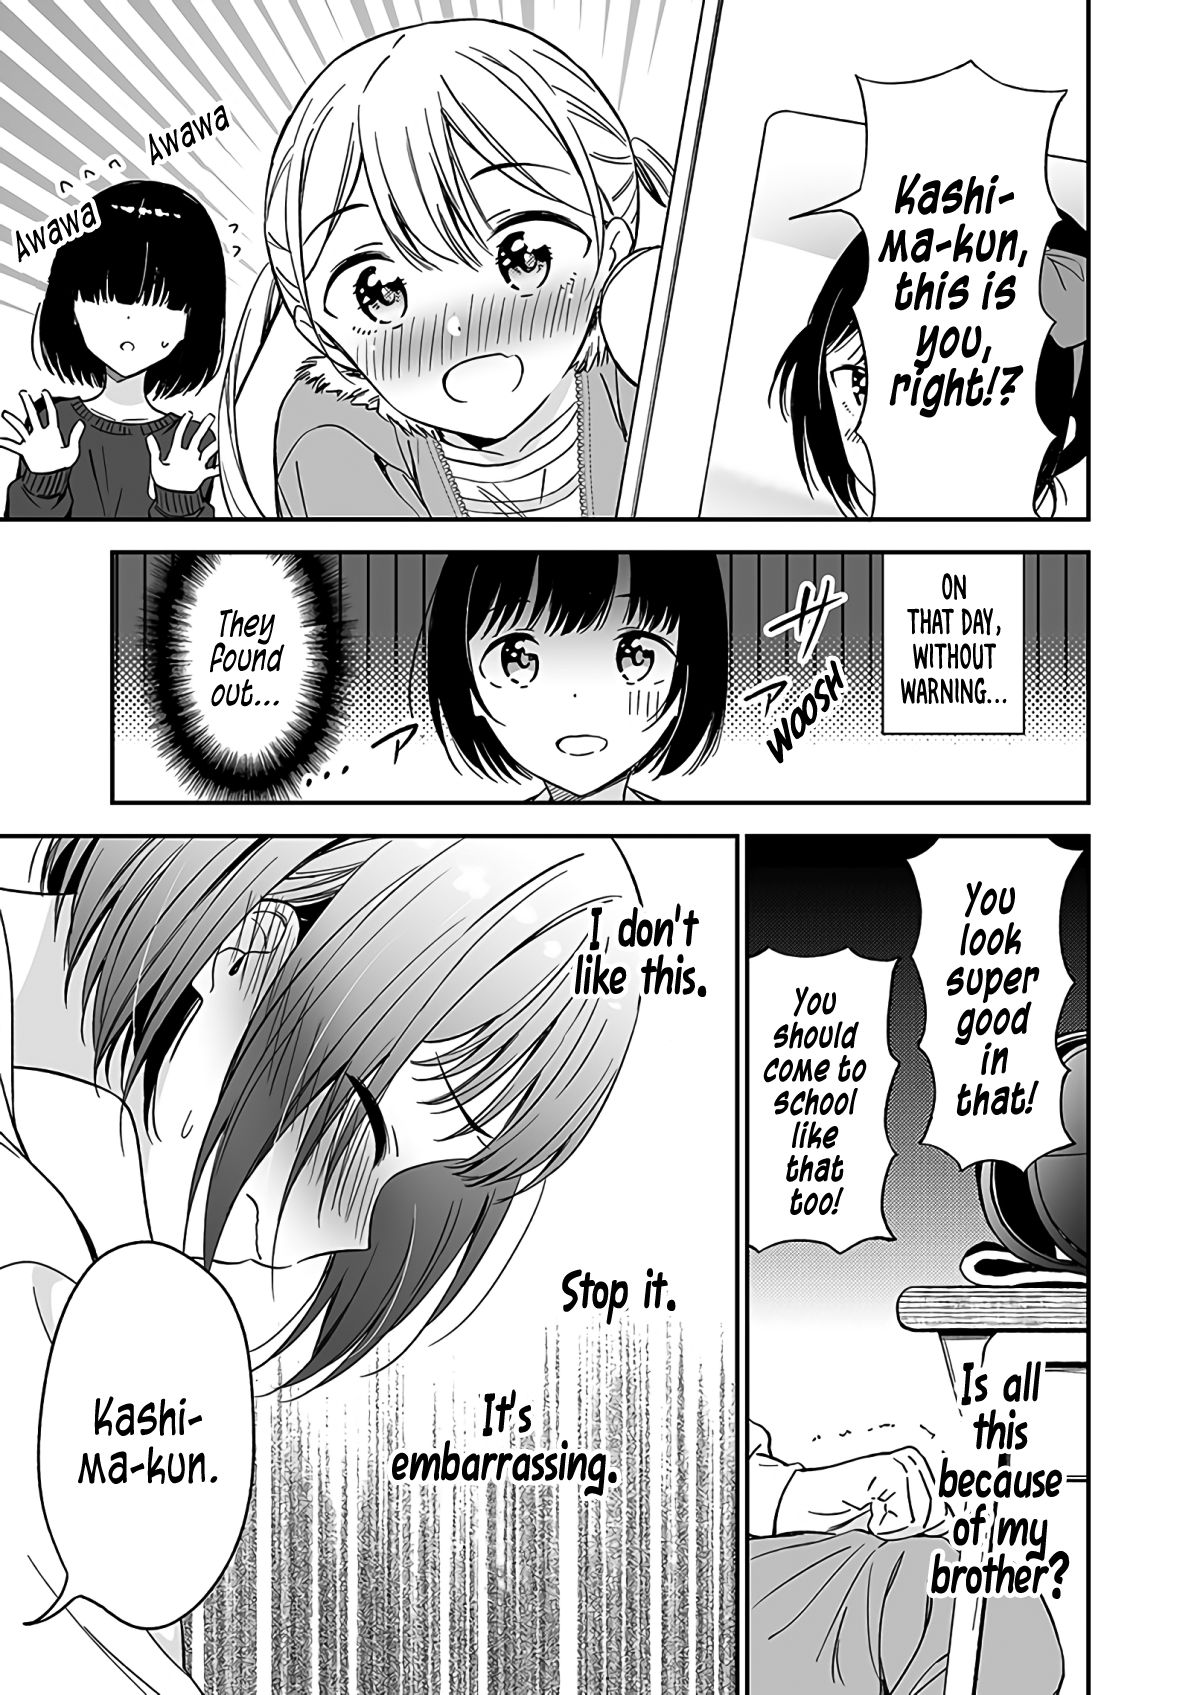 My Super Cute Childhood Friend is too Clingy - chapter 2 - #2